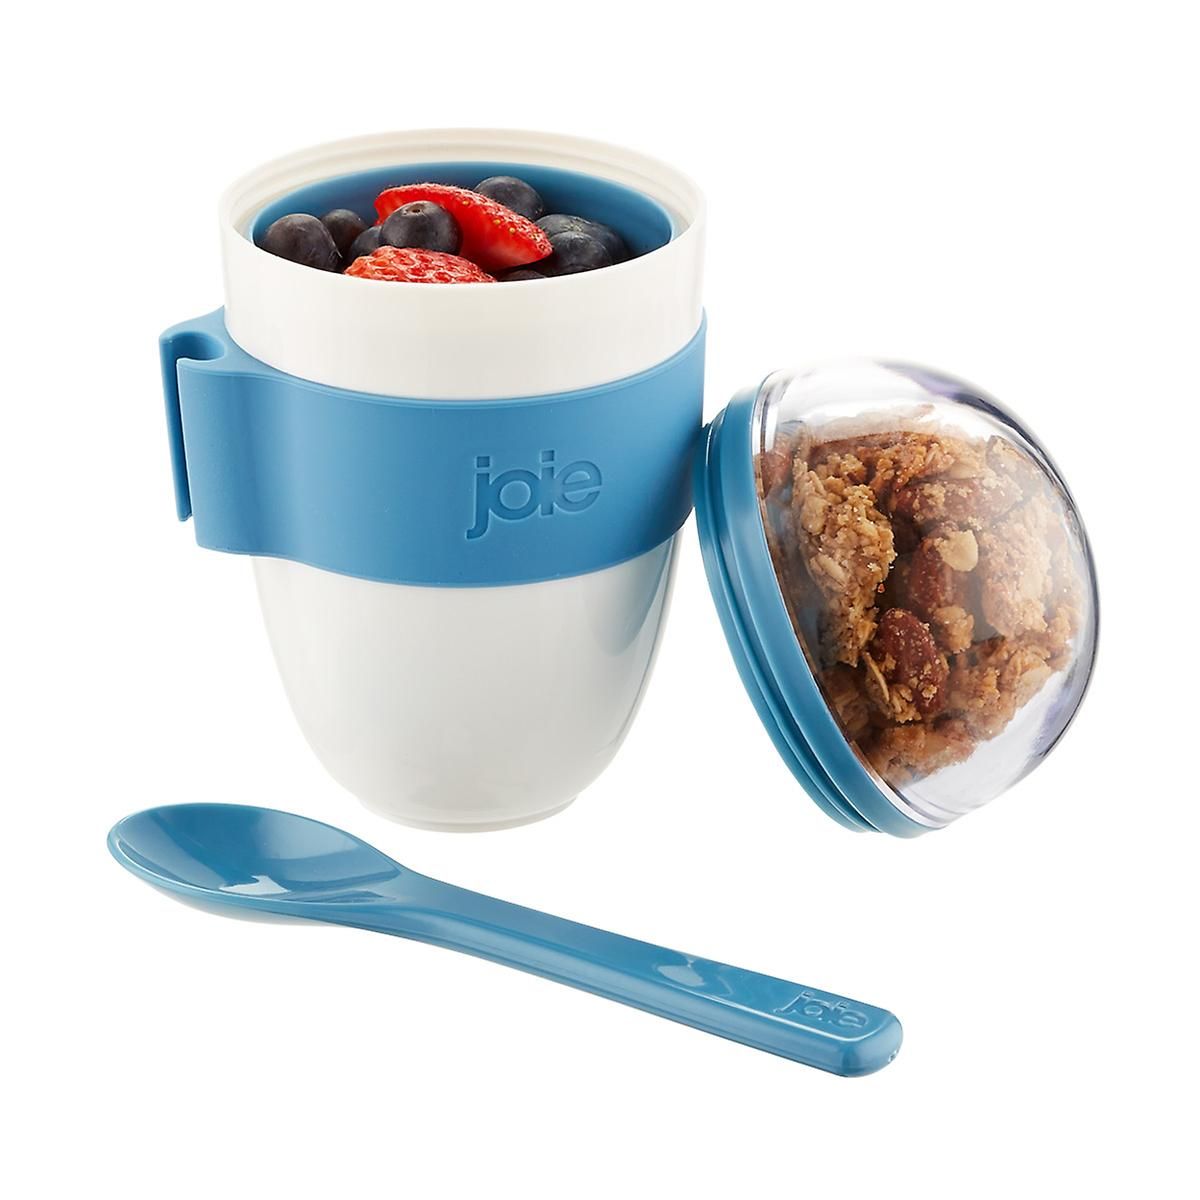 Yogurt-on-the-Go | The Container Store